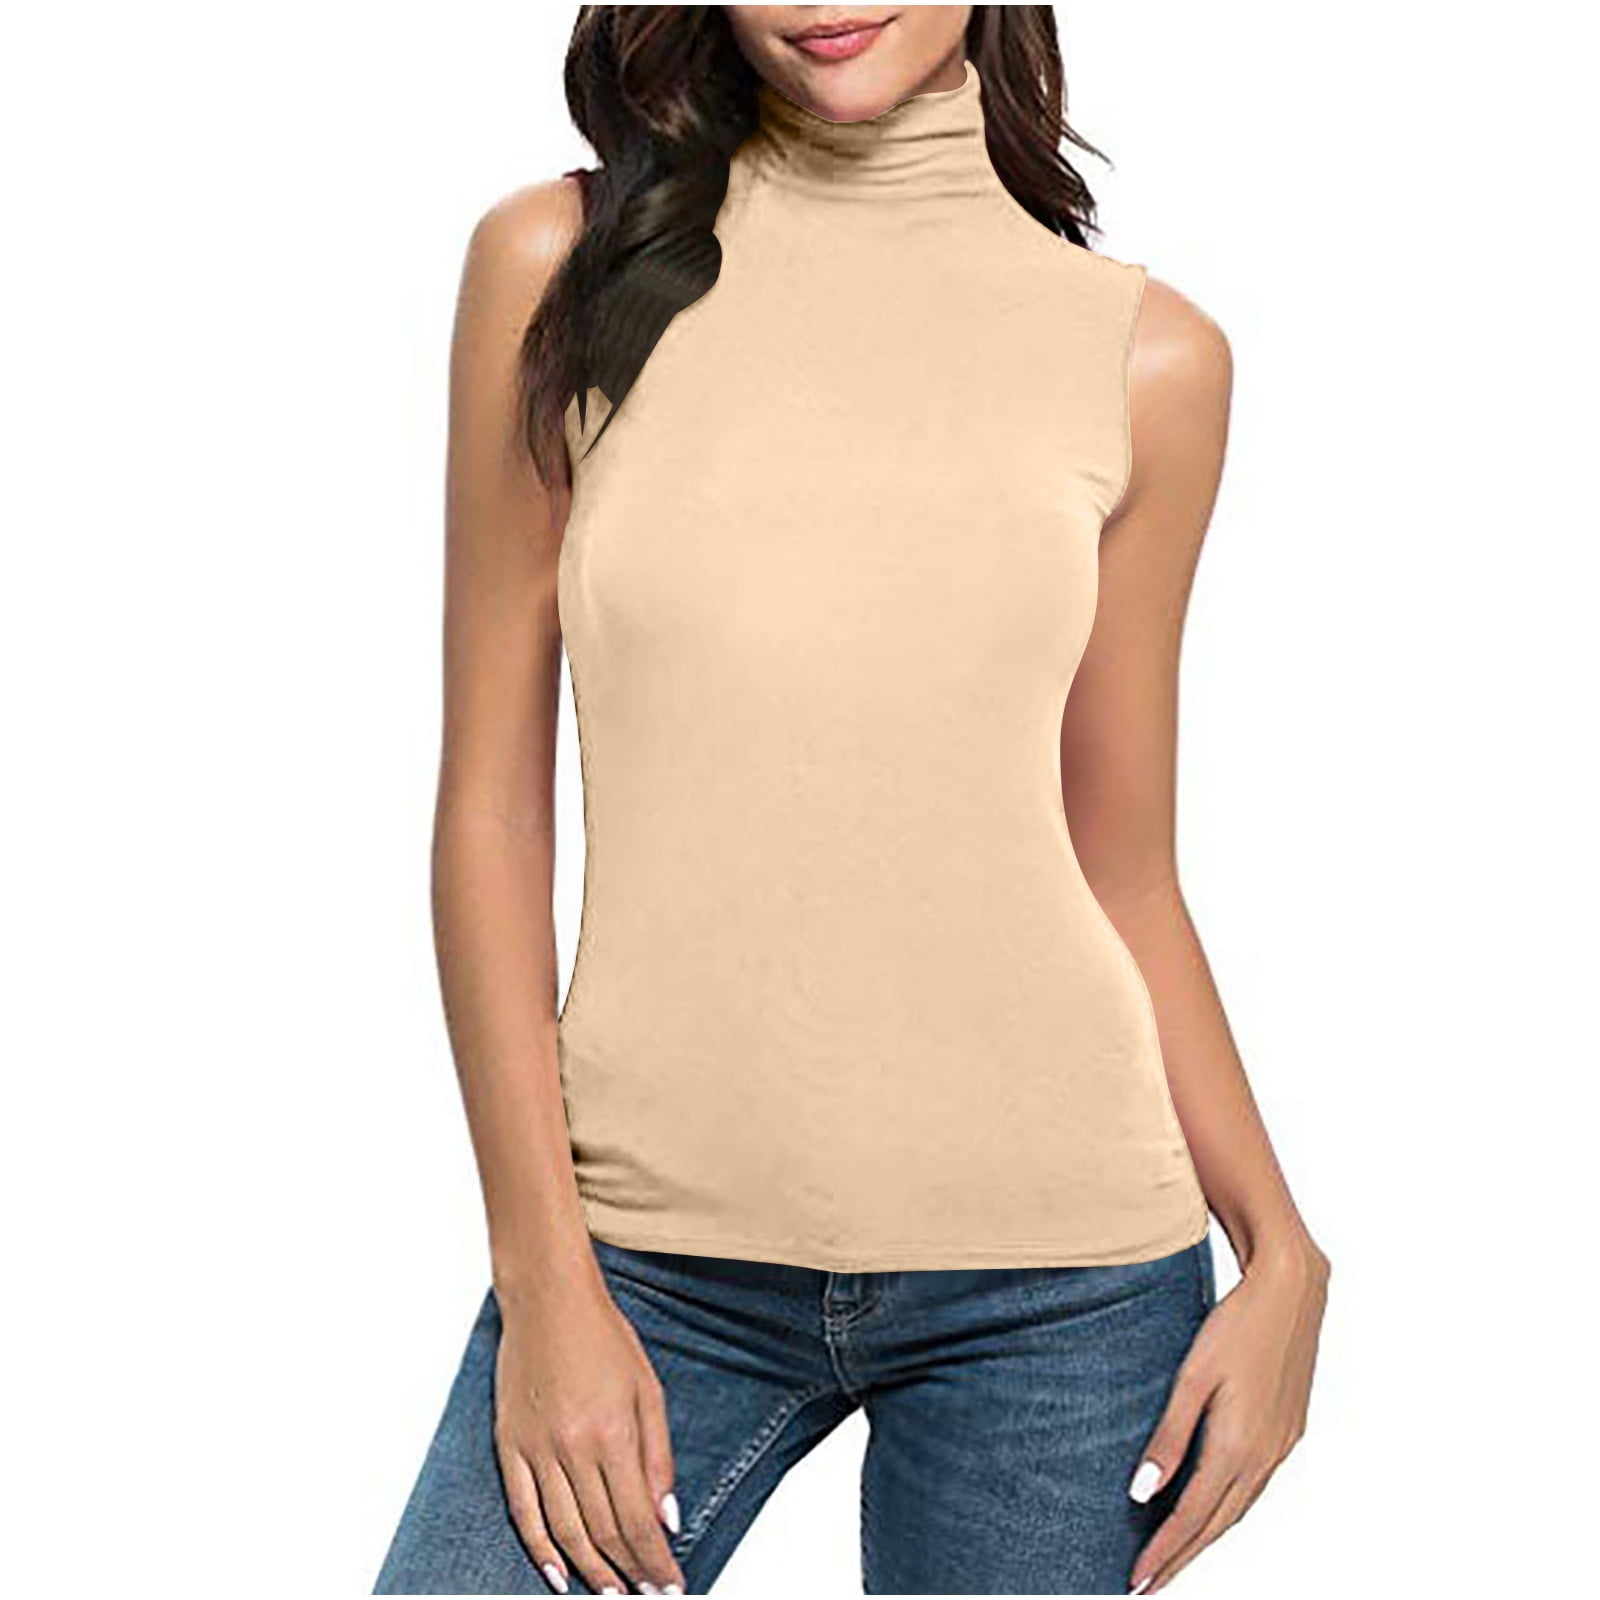 Black and Friday Deals Clothing Womens Tops Clearance Under $5 Tops For ...